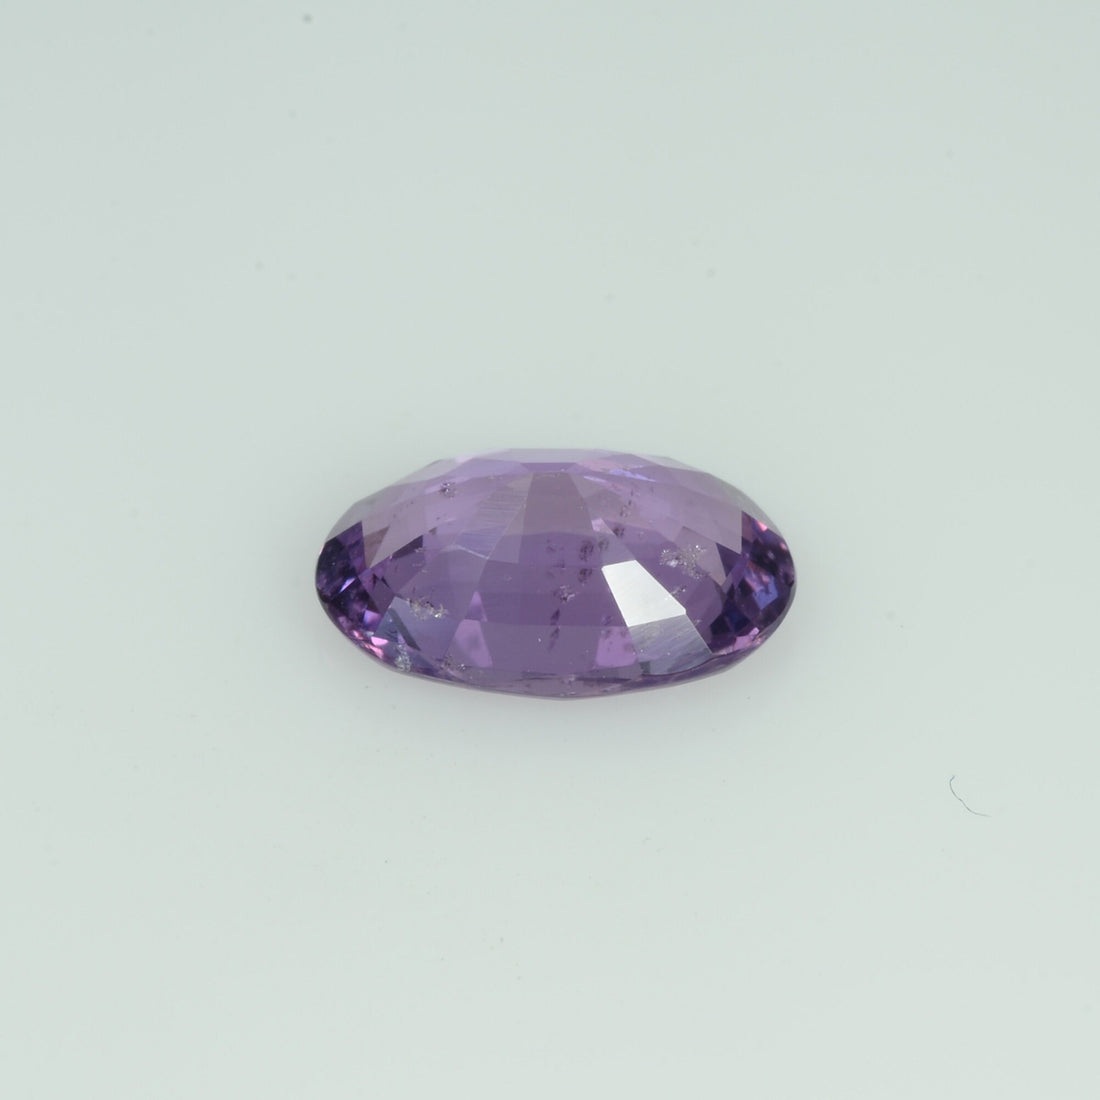 1.78 cts Natural Purple Sapphire Loose Gemstone Oval Cut